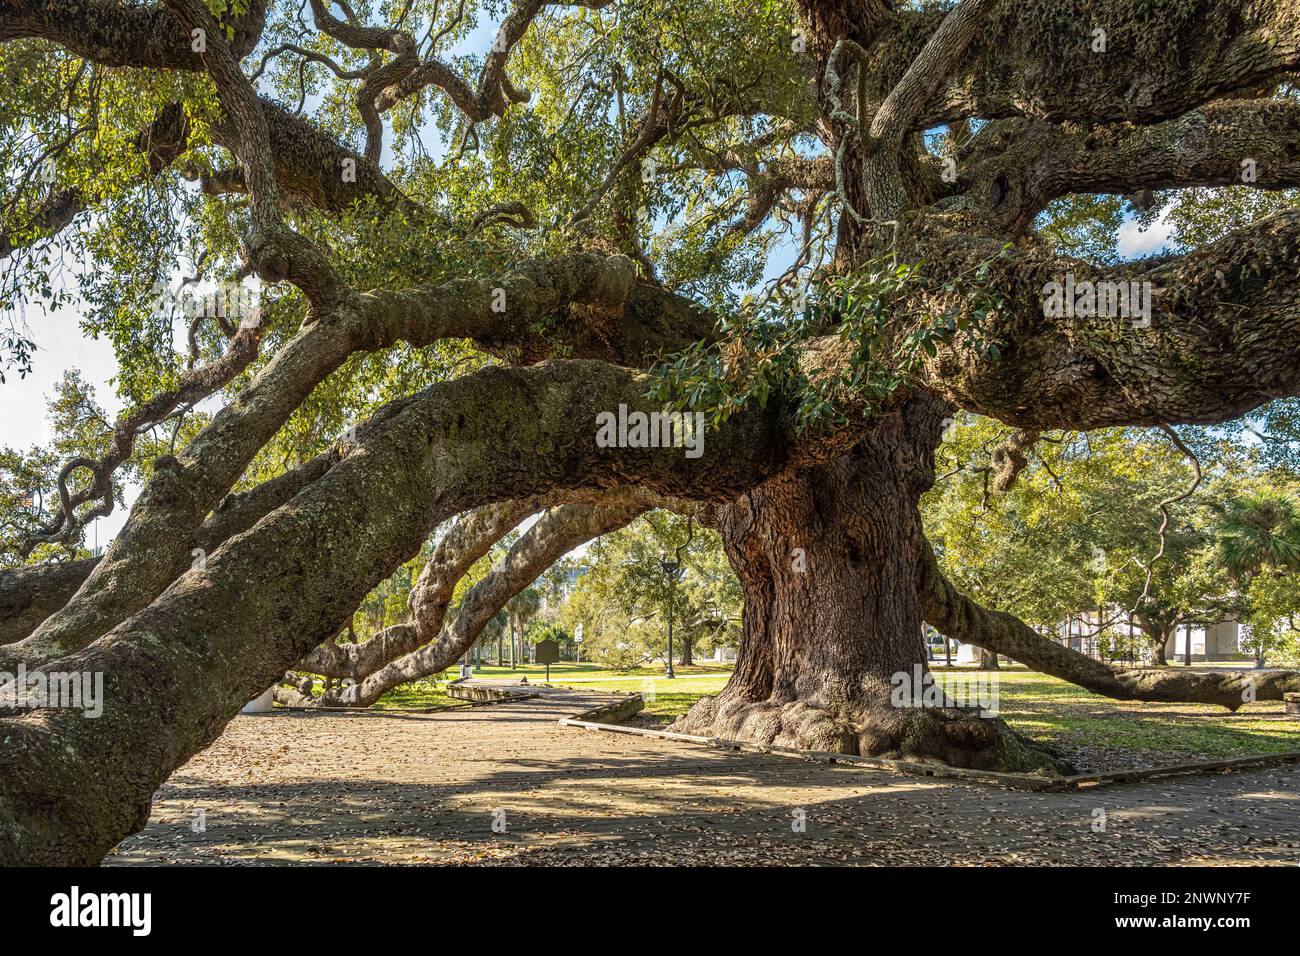 Treaty Oak, a massive and ancient Florida live oak tree at Jessie Ball duPont Park in downtown Jacksonville, Florida. (USA) Stock Photo